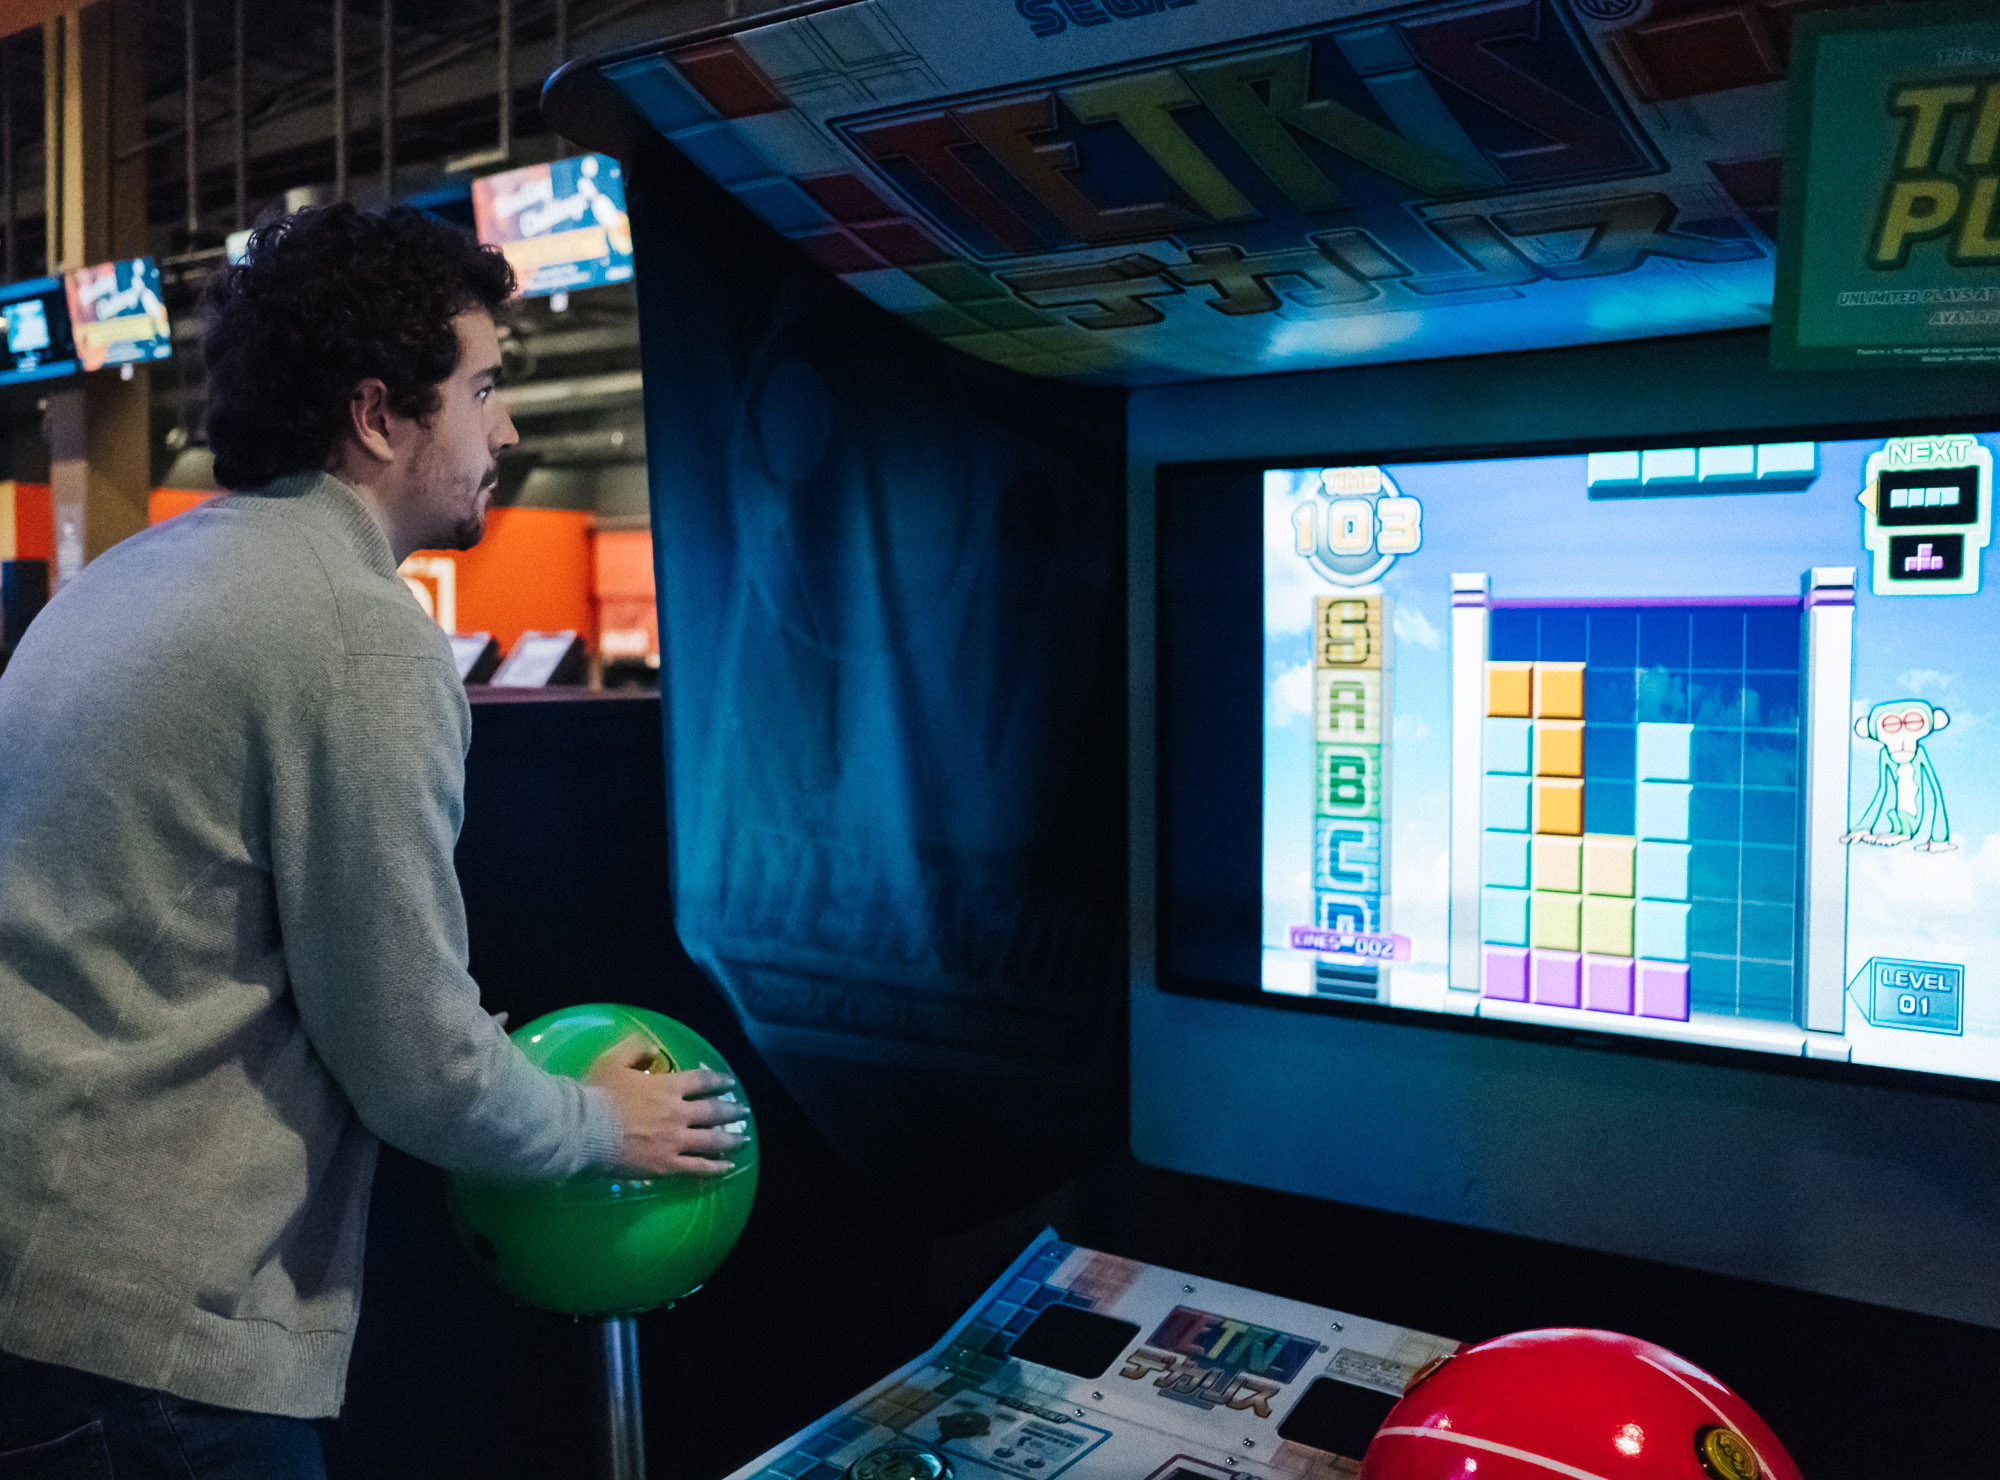 Me playing Giant Tetris at an arcade, the cabinet features two giant joysticks which I can be seen controlling one of them.